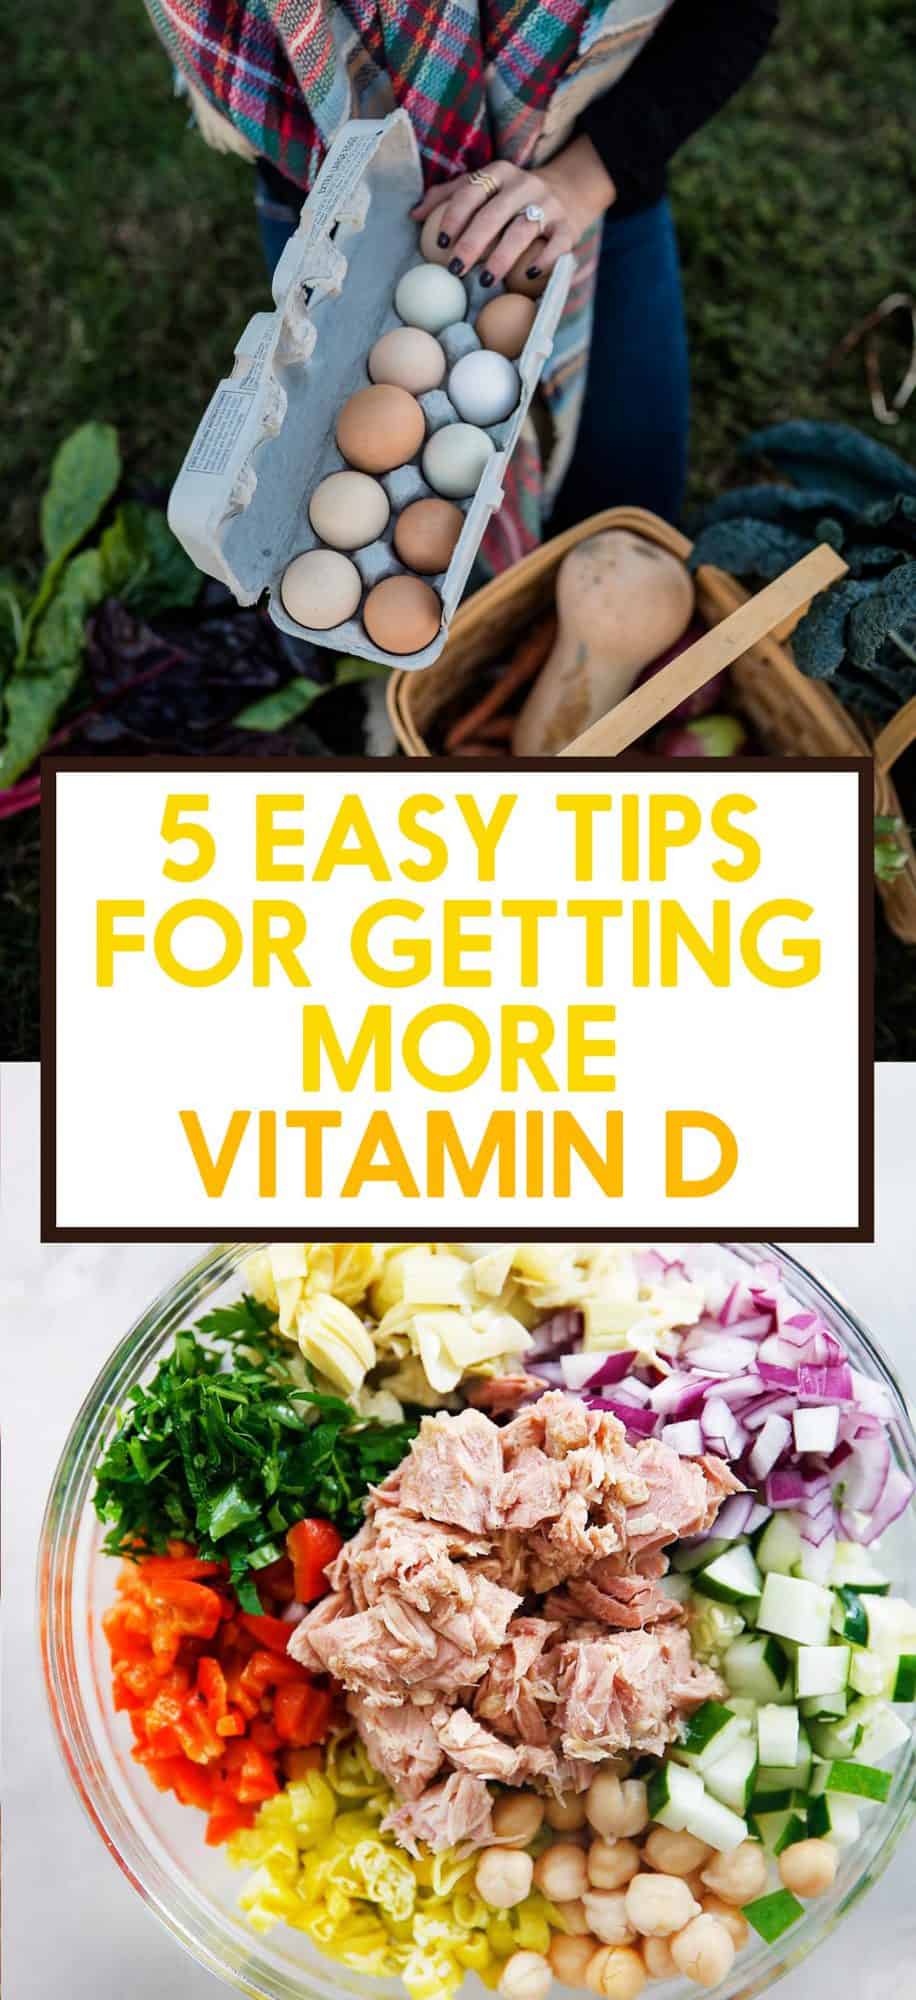 5 Easy Tips for Getting More Vitamin D